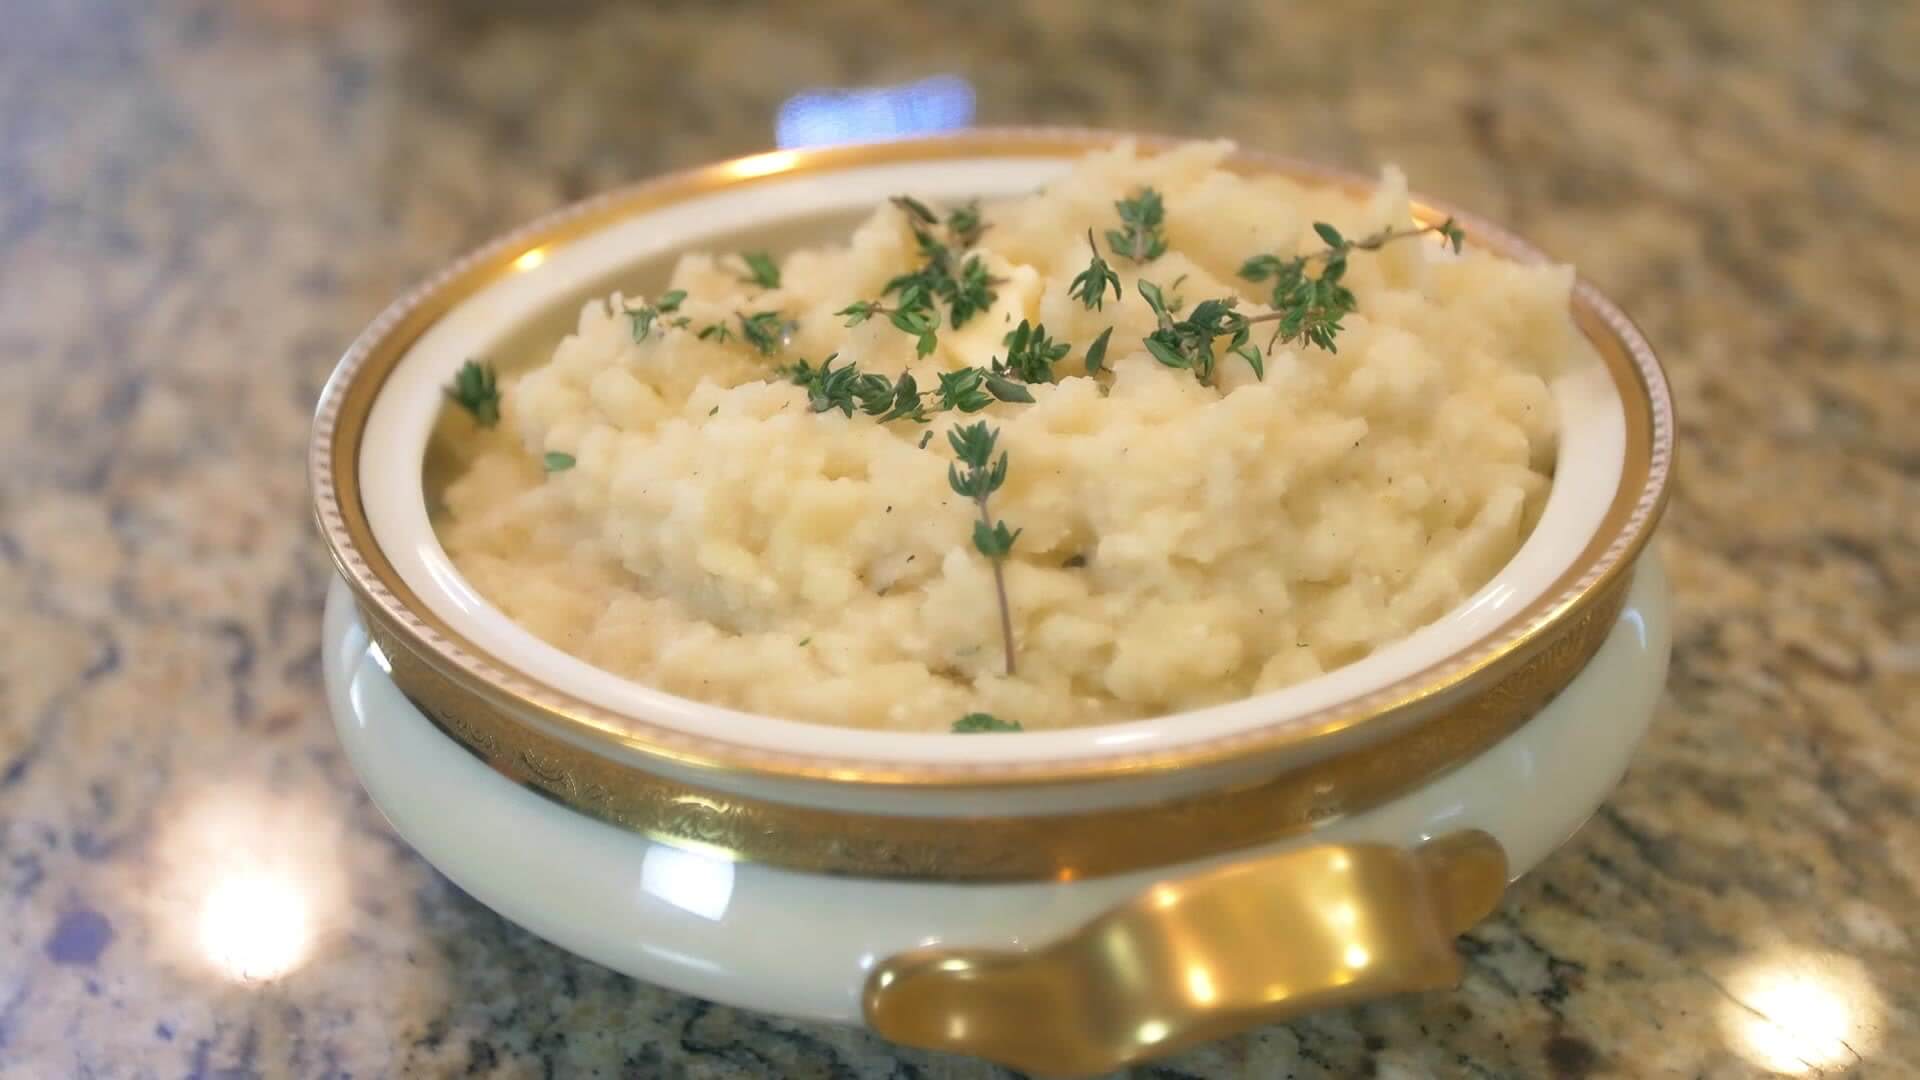 Ali in the Valley – Garlic Mashed Potatoes